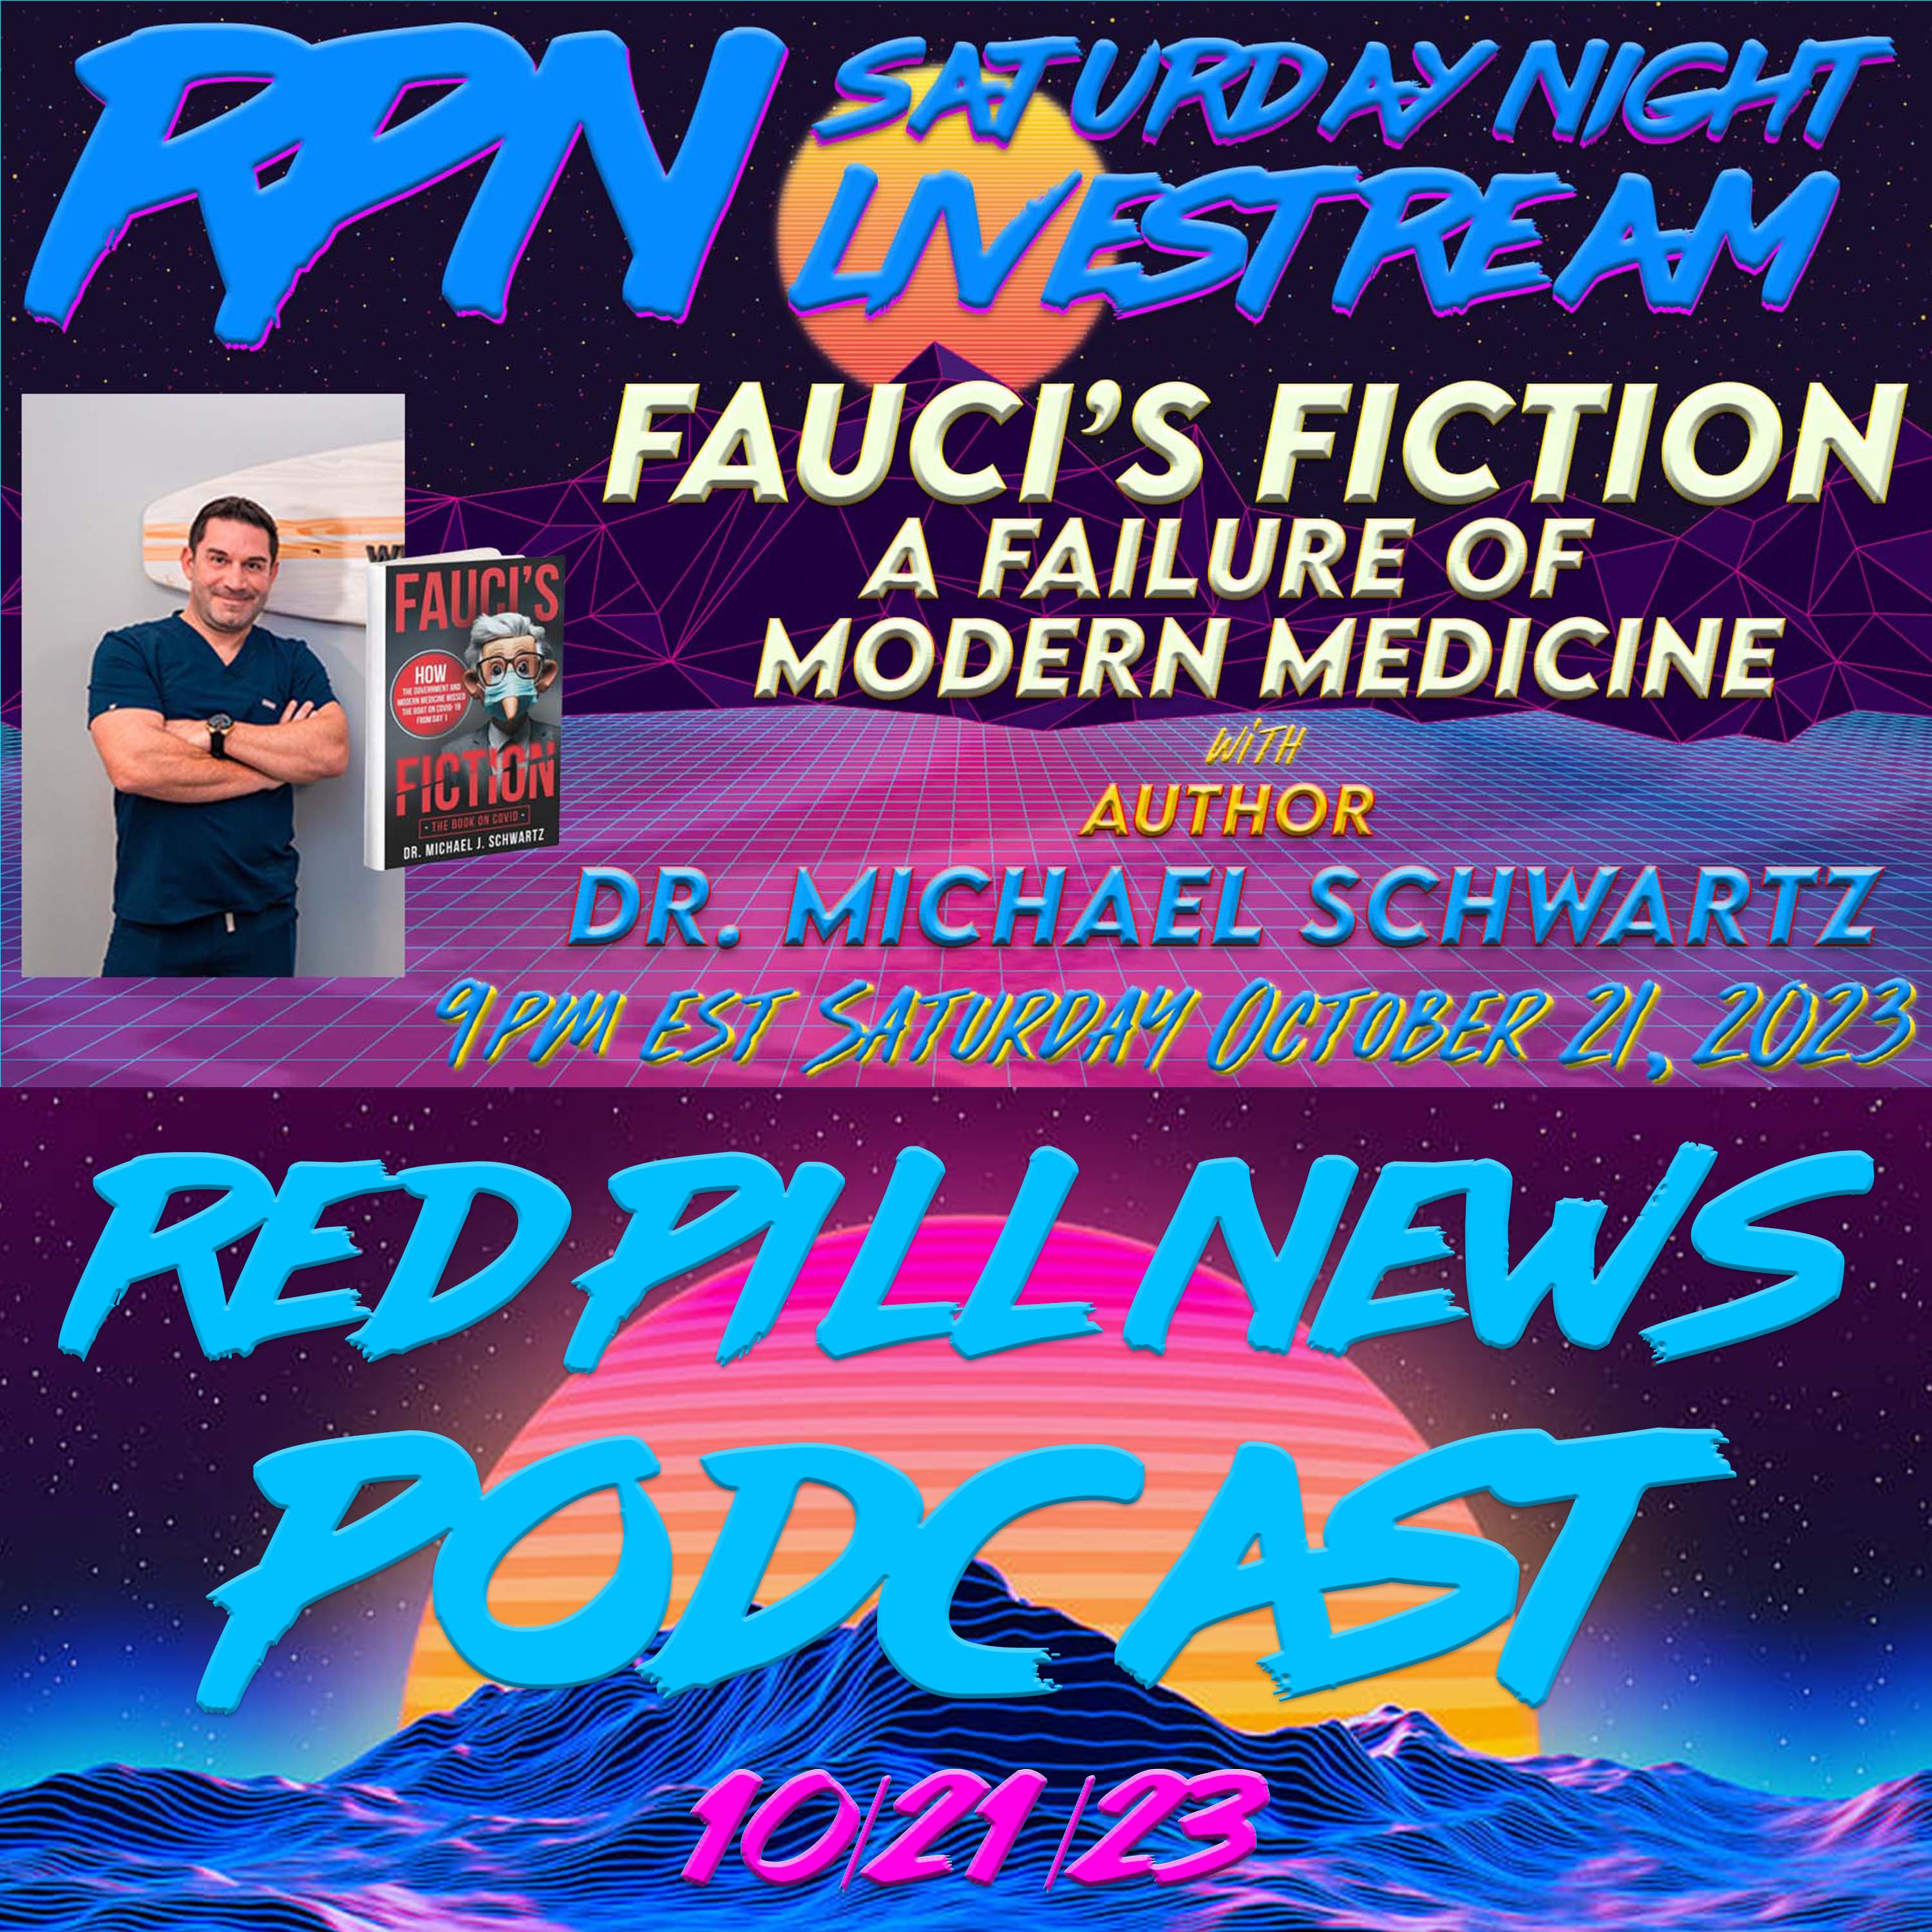 Fauci’s Fiction - An Epic Failure with Dr. Michael Schwartz on Sat. Night Livestream